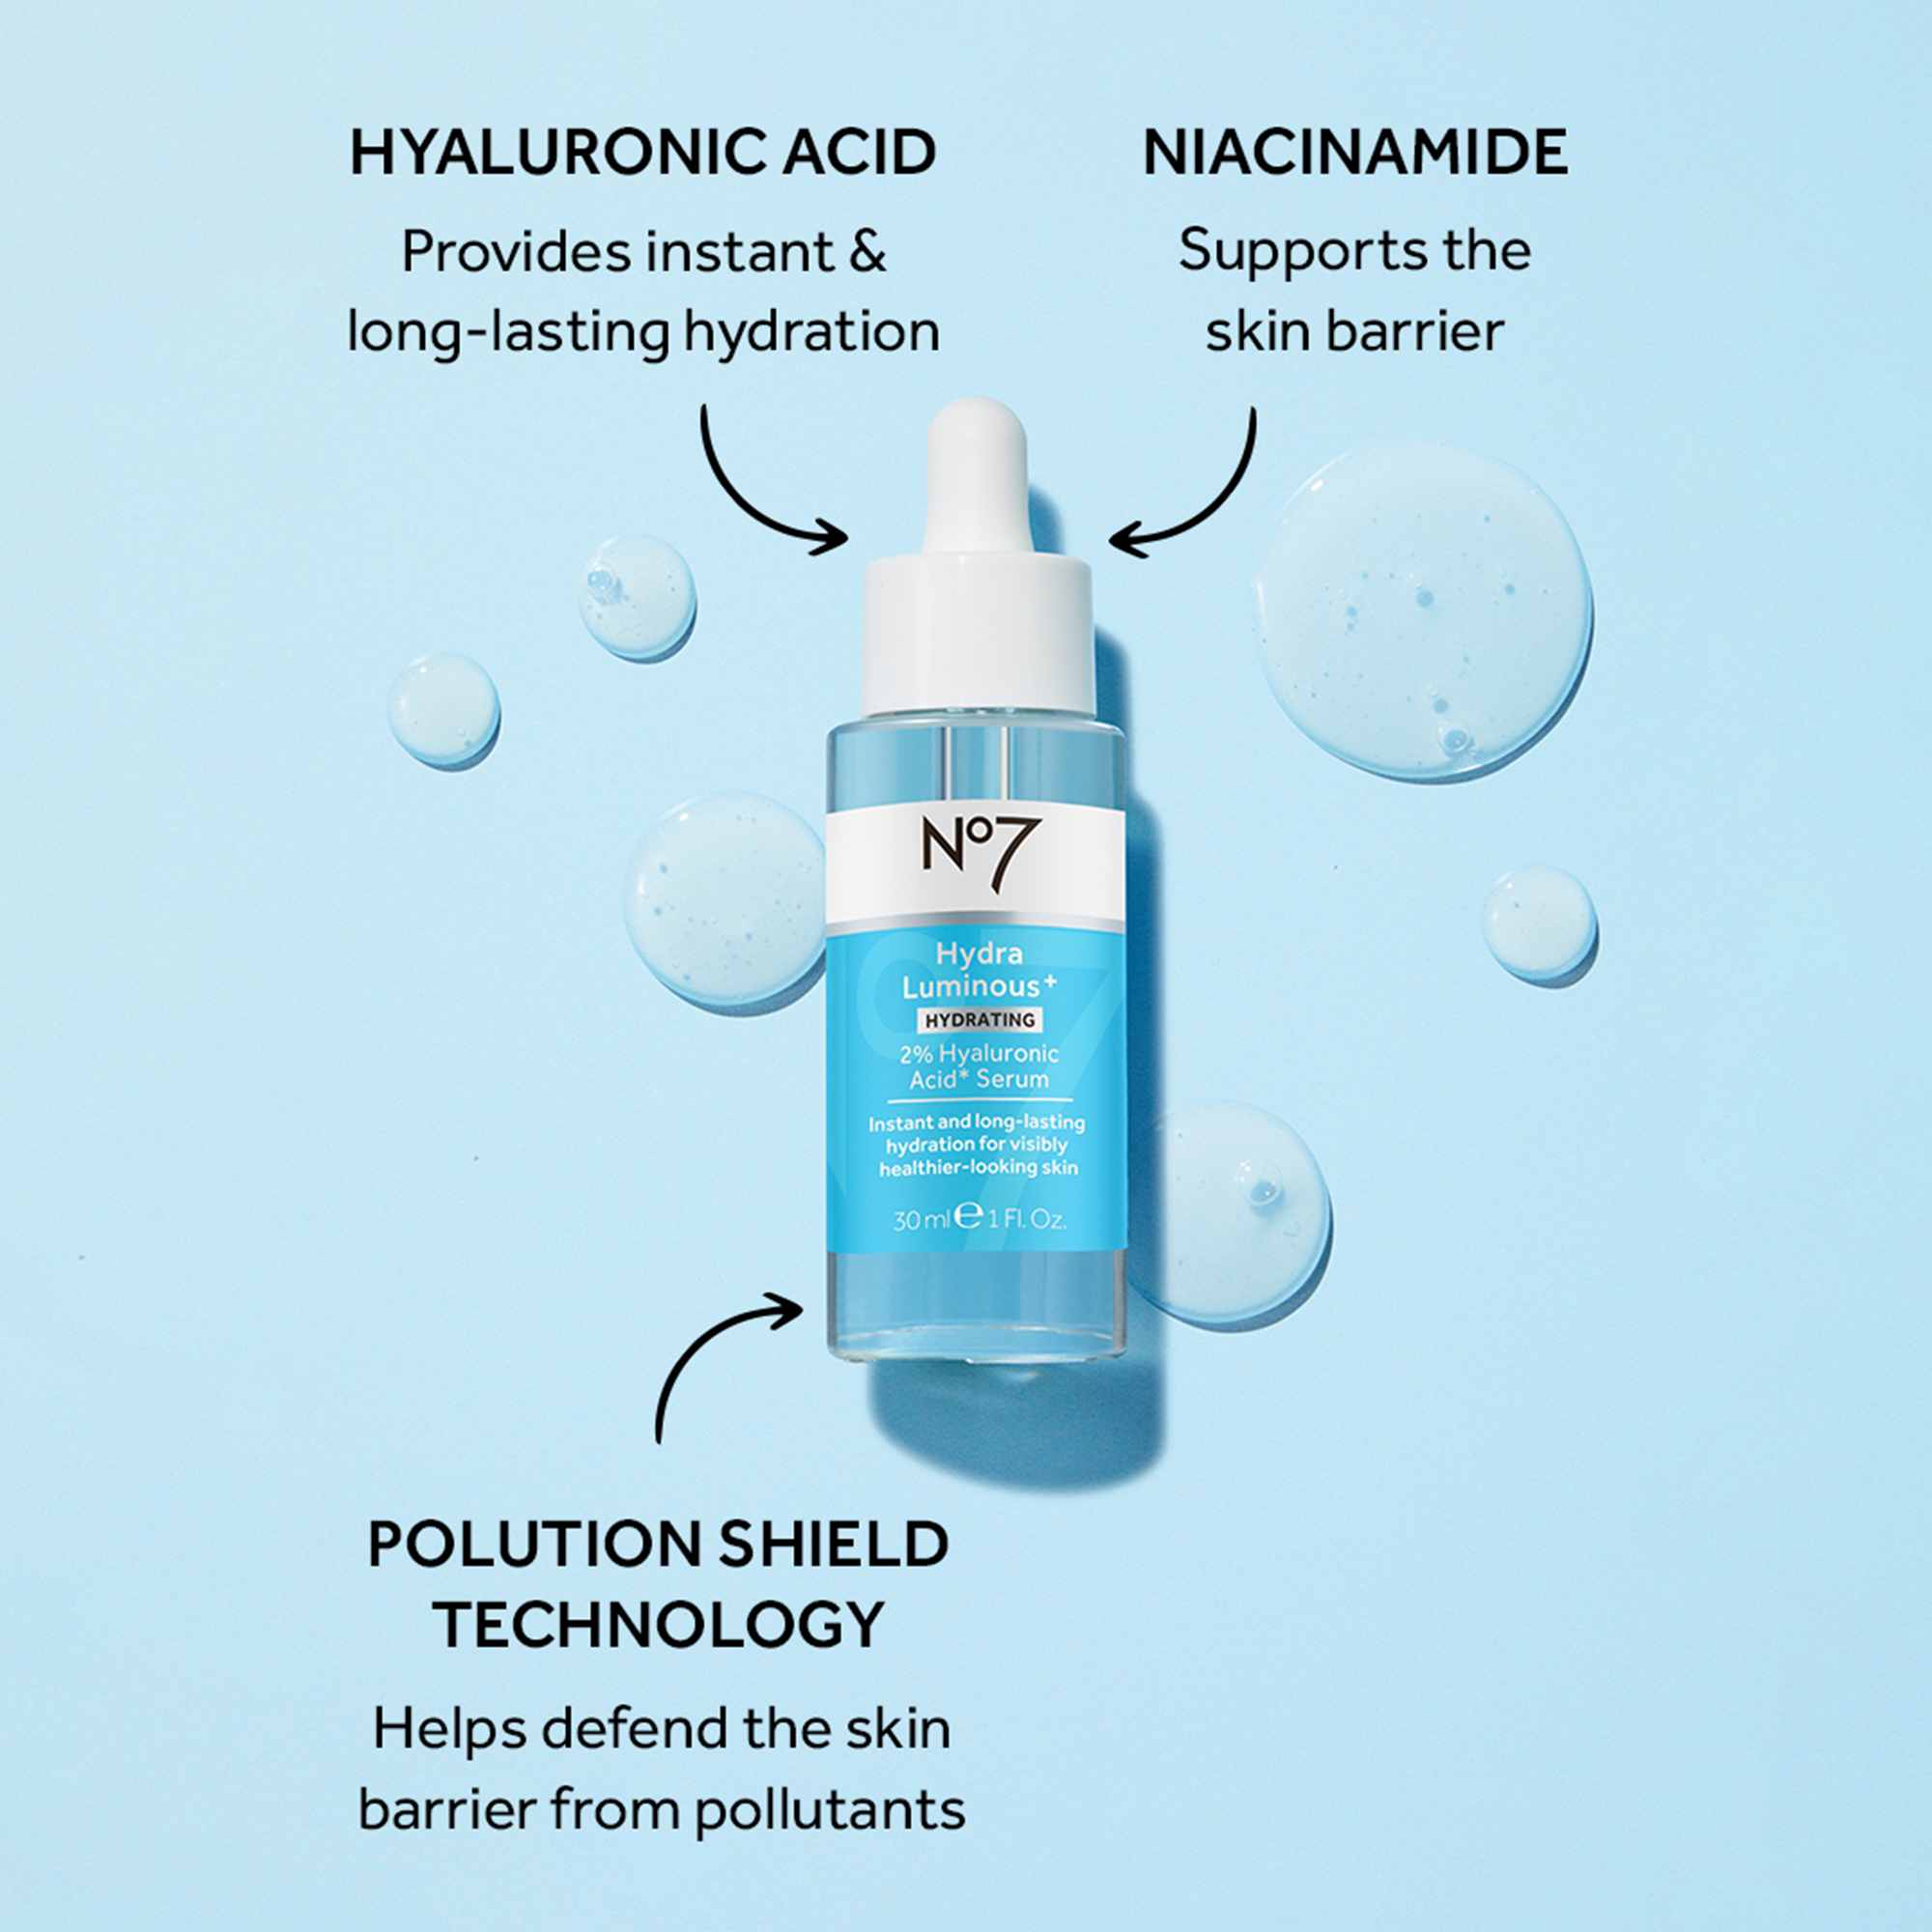 HYALURONIC ACID Provides instant & long-lasting hydration N°7 Hydra Luminous + HYDRATING 2% Hyaluronic Acid Serum Instant and long-lasting hydration for visibly healthier-looking skin 30 ml 1 Fl. Oz. POLUTION SHIELD TECHNOLOGY Helps defend the skin barrier from pollutants NIACINAMIDE Supports the skin barrier